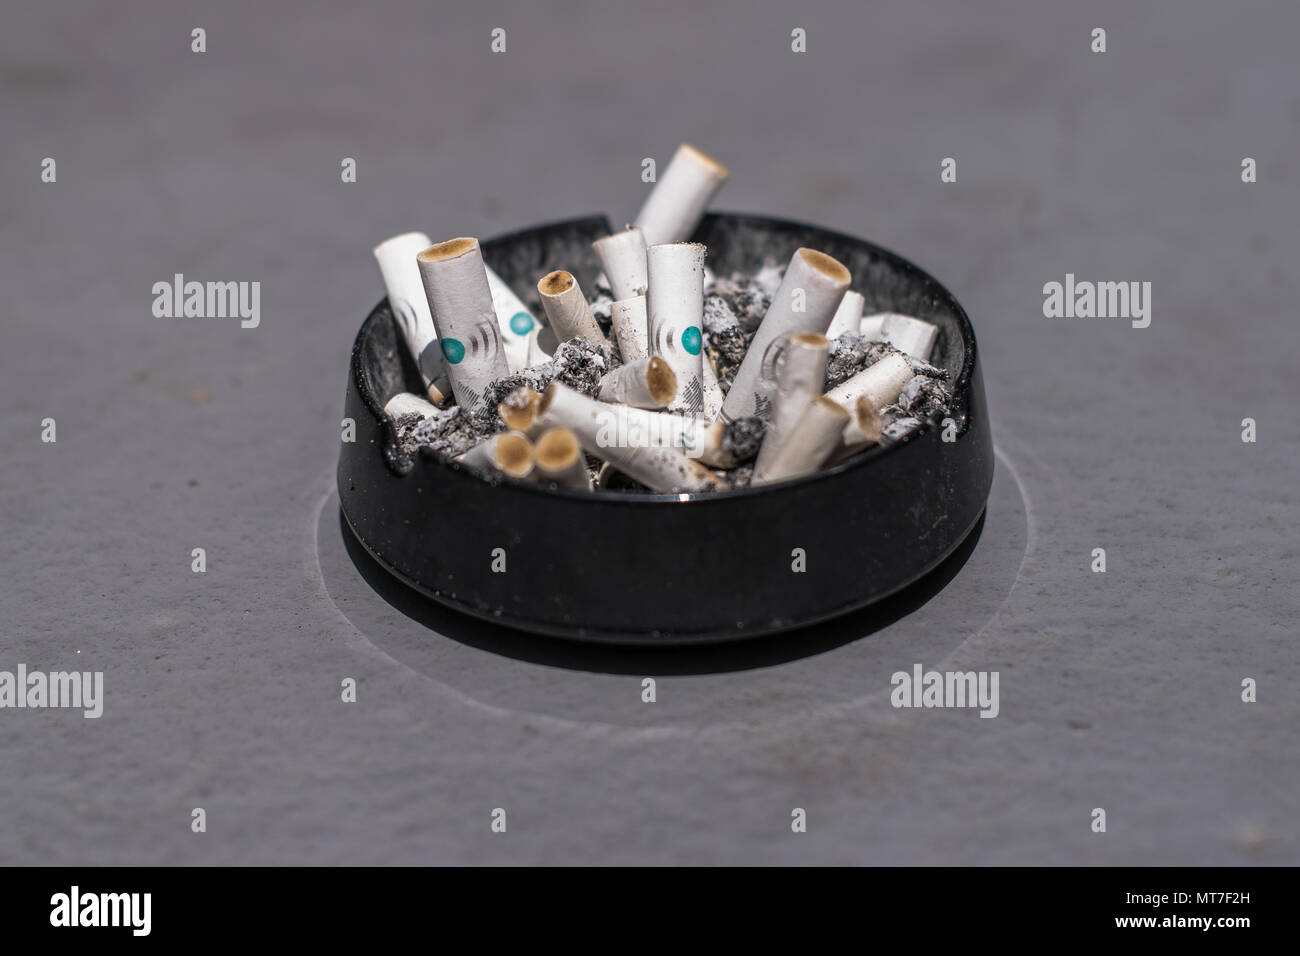 Chesterfield banned cigarettes menthol flavor because of addiction questions related to the cigarette flavor and dependence. Stock Photo